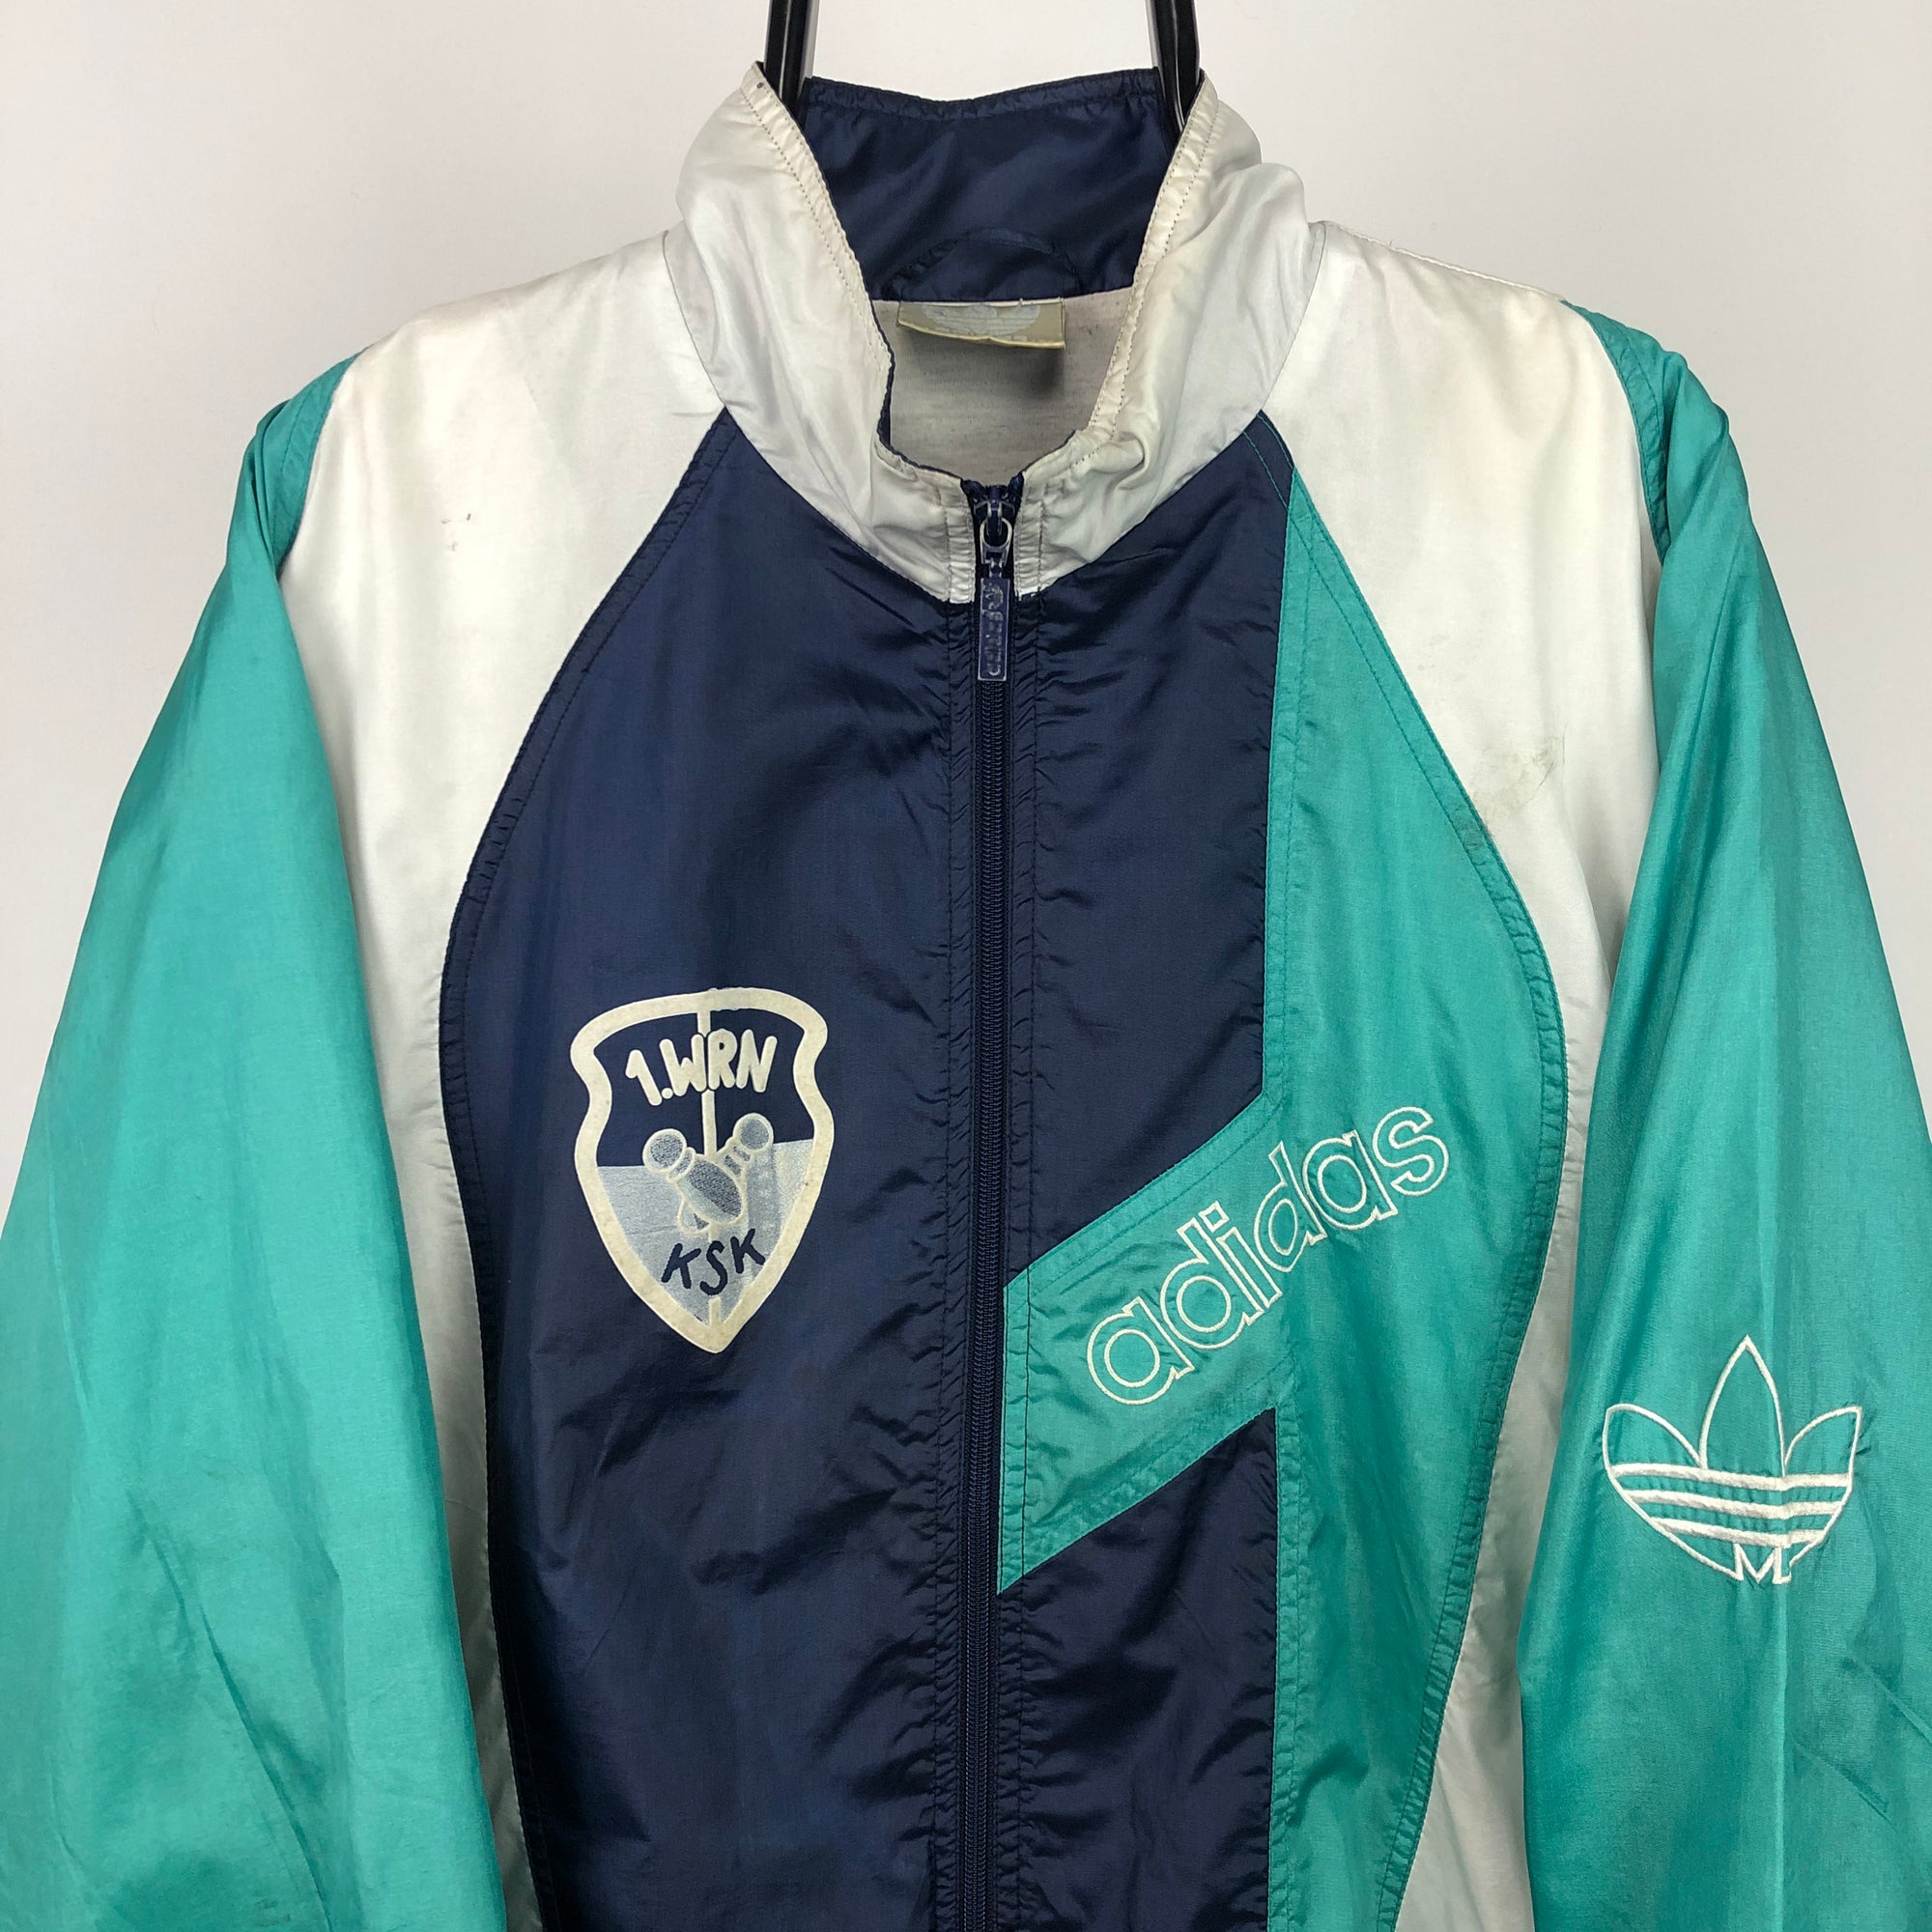 Vintage 90s Adidas Track Jacket in Mint Green/Navy/White - Men's Large/Women's XL